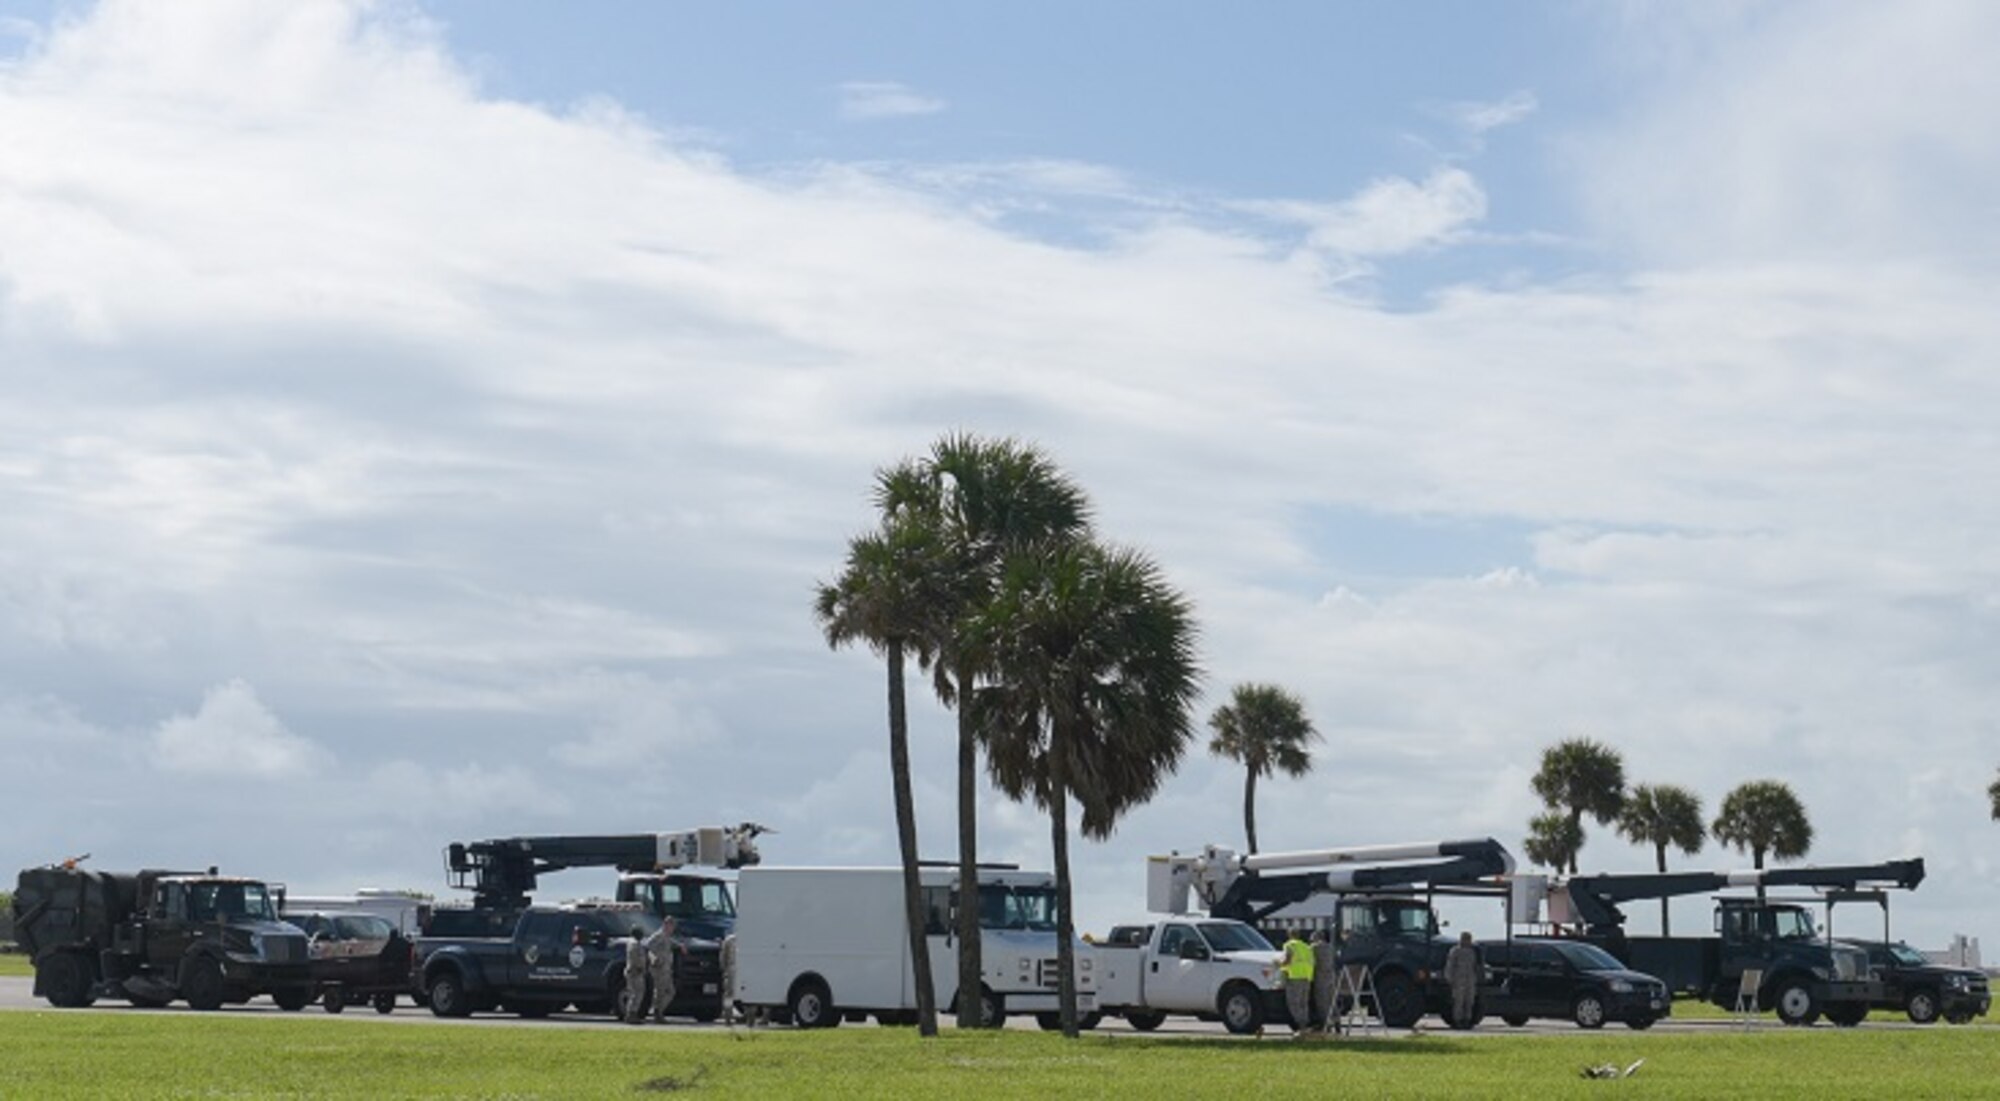 The Patrick Air Force Base hurricane recovery team prepares to leave the installation and set up operations in an alternate location Oct. 5, 2016. Cape Canaveral Air Force Station also has a hurricane recovery team. The teams are comprised of security forces, civil engineers, medical personnel and other specialties who can assess storm damages and provide subject matter expert recommendations immediately following the storm.  Throughout the time the team is deployed to an alternate location they are in constant contact with the wing's command and control teams, “Silver Team” at Kennedy Space Center and its back up, "Blue Team" at a secure site in Orlando. Together, the wing teams ran 24-hour operations and monitored the storm track from the day prior to the arrival of Hurricane Matthew through recovery operations. The 45th SW returned to normal operations within three days following the storm.  (U.S. Air Force photo/Matthew Jurgens)